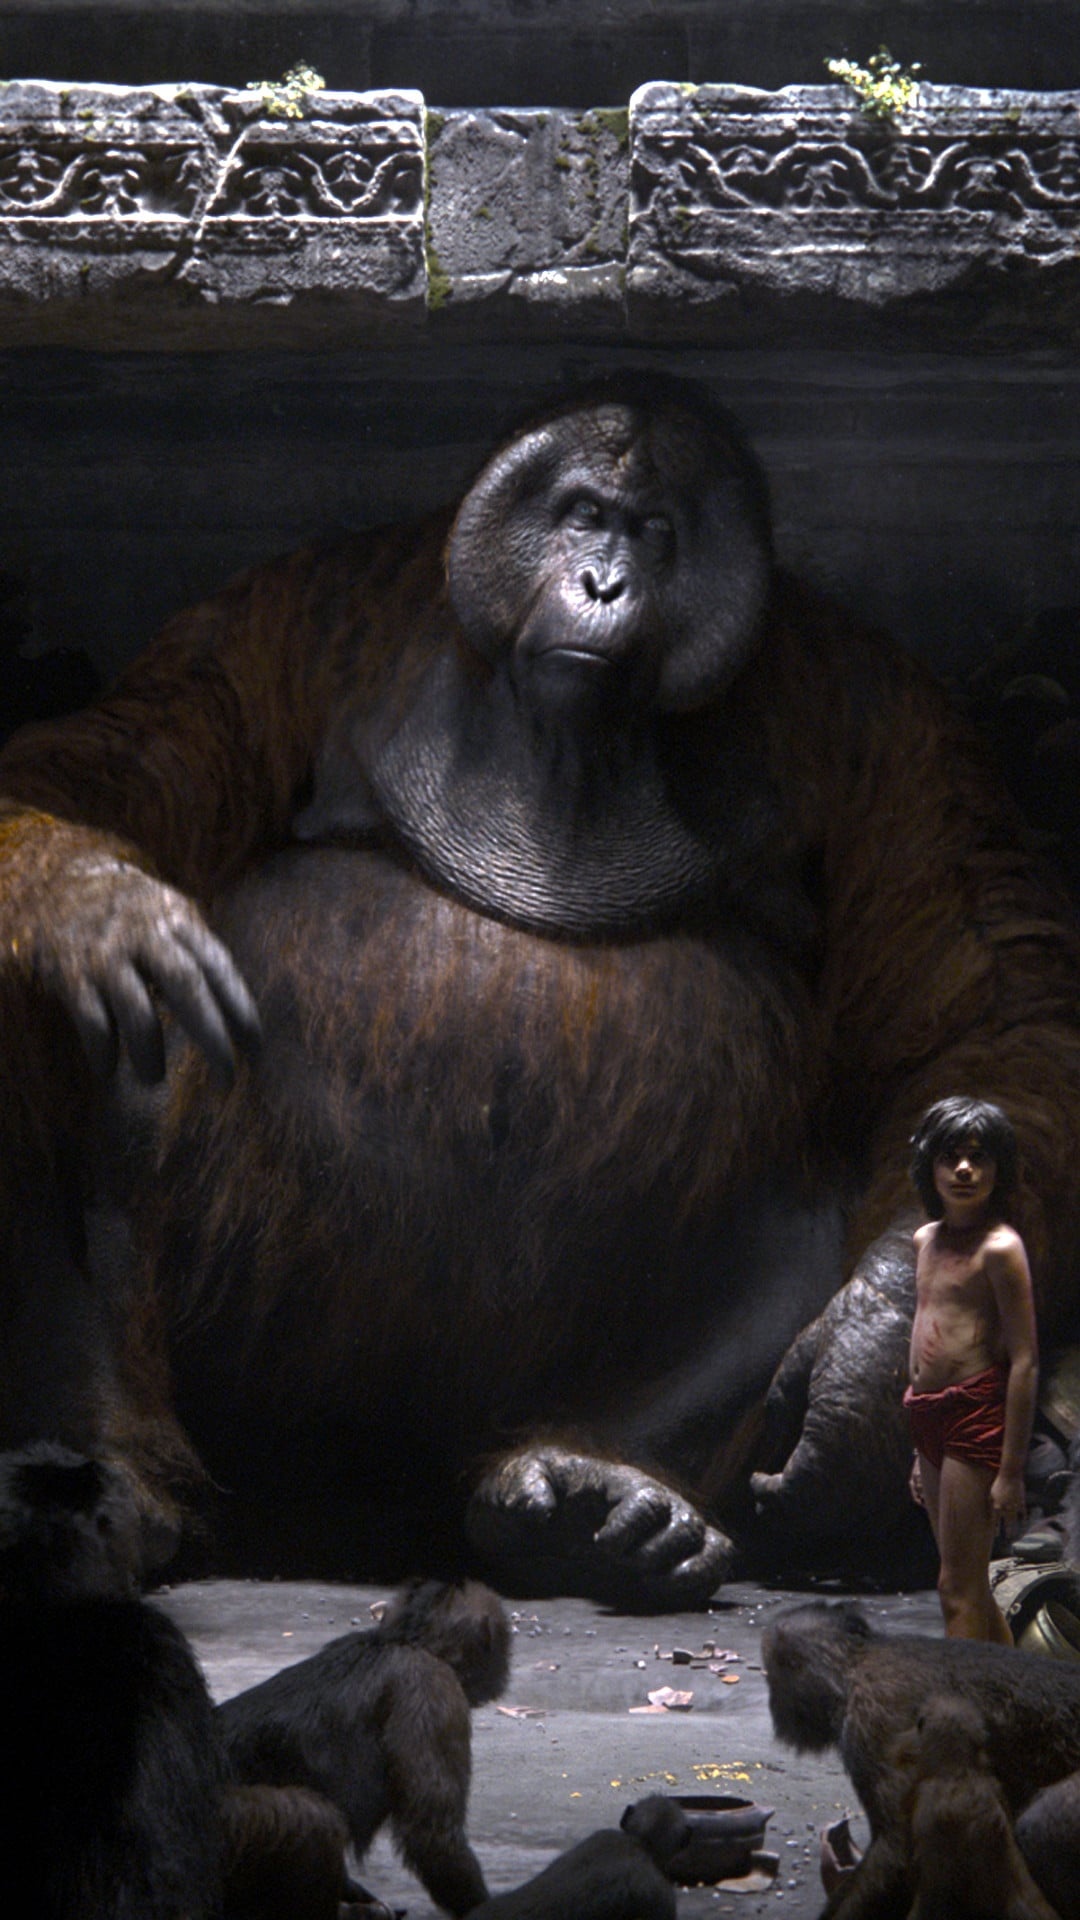 The Jungle Book movie, iPhone wallpapers, Adventure awaits, Enchanting journey, 1080x1920 Full HD Handy